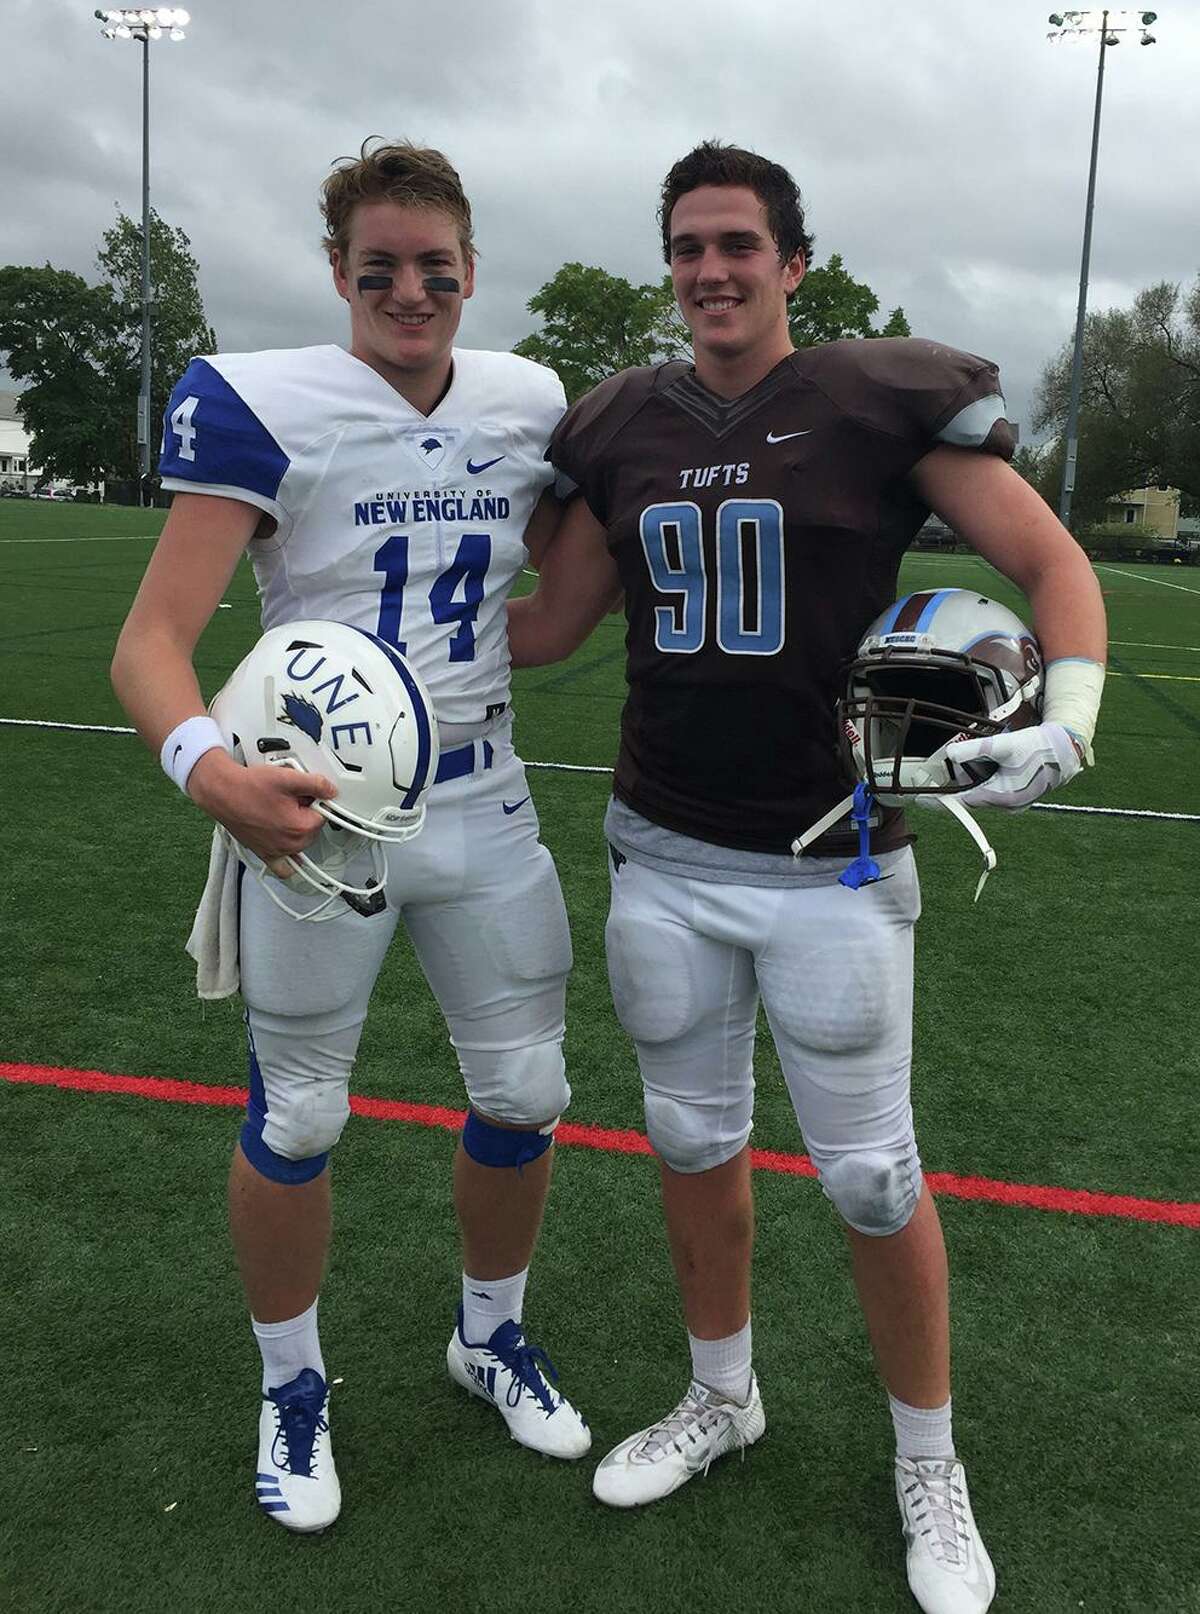 Former Darien teammates Brian Peters (14, left) of the University of New England and Quinn Fay (90) of Tufts University meet on the field during a football game in 2017.